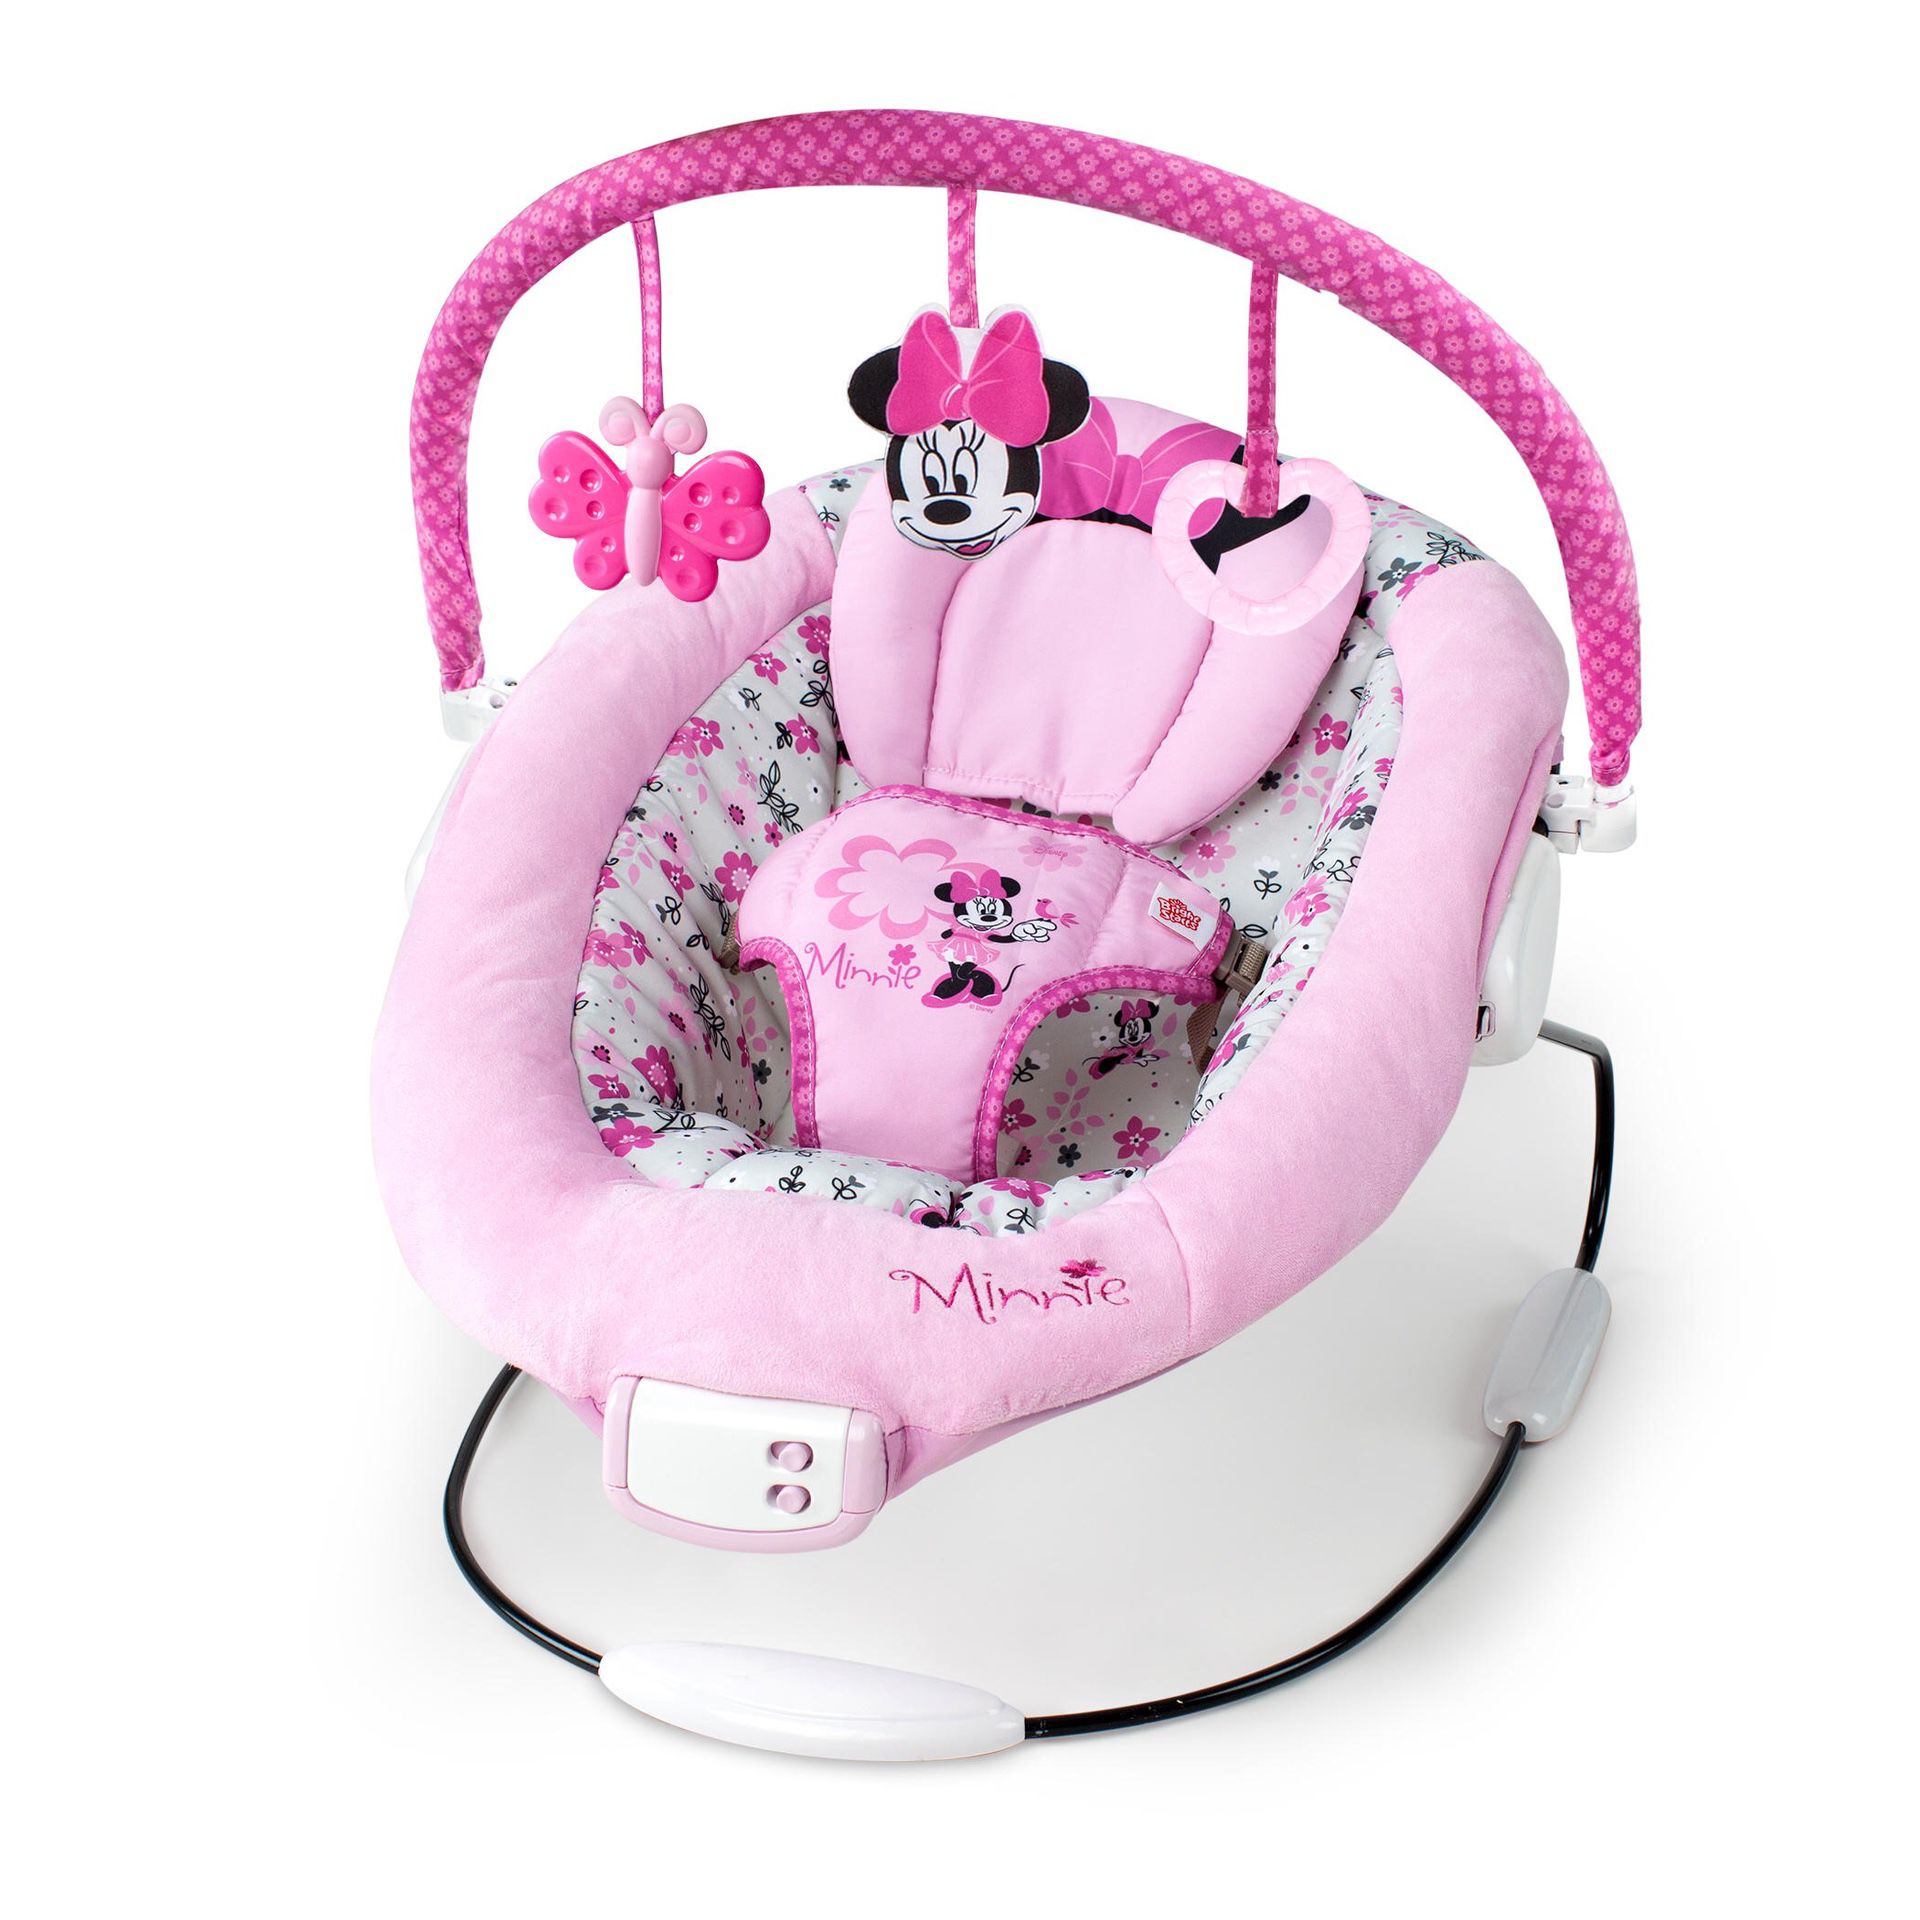 New Bright Starts Minnie Mouse Bouncer